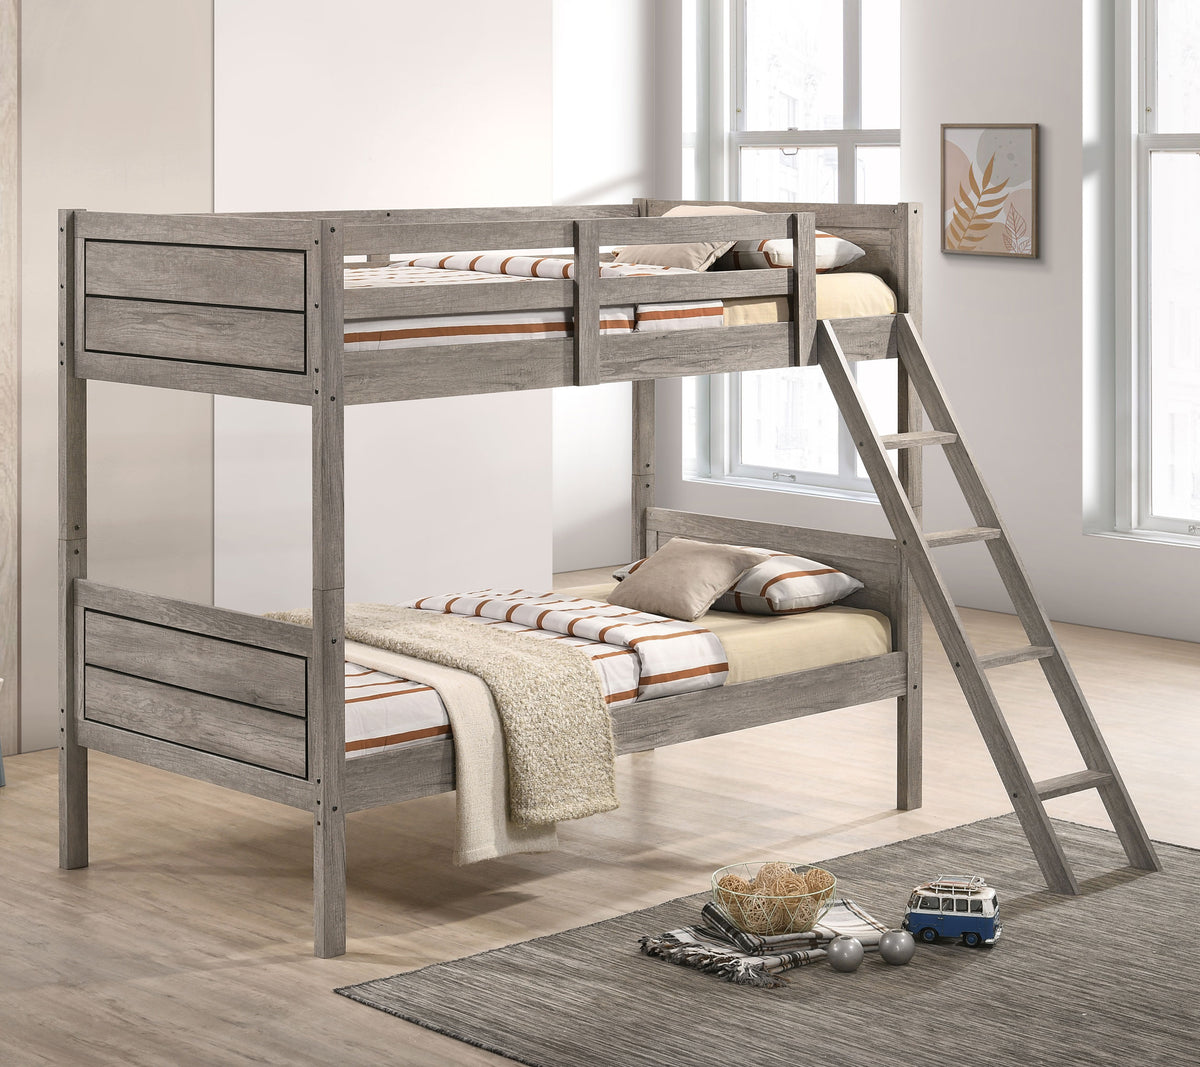 Ryder Bunk Bed Weathered Taupe Ryder Bunk Bed Weathered Taupe Half Price Furniture